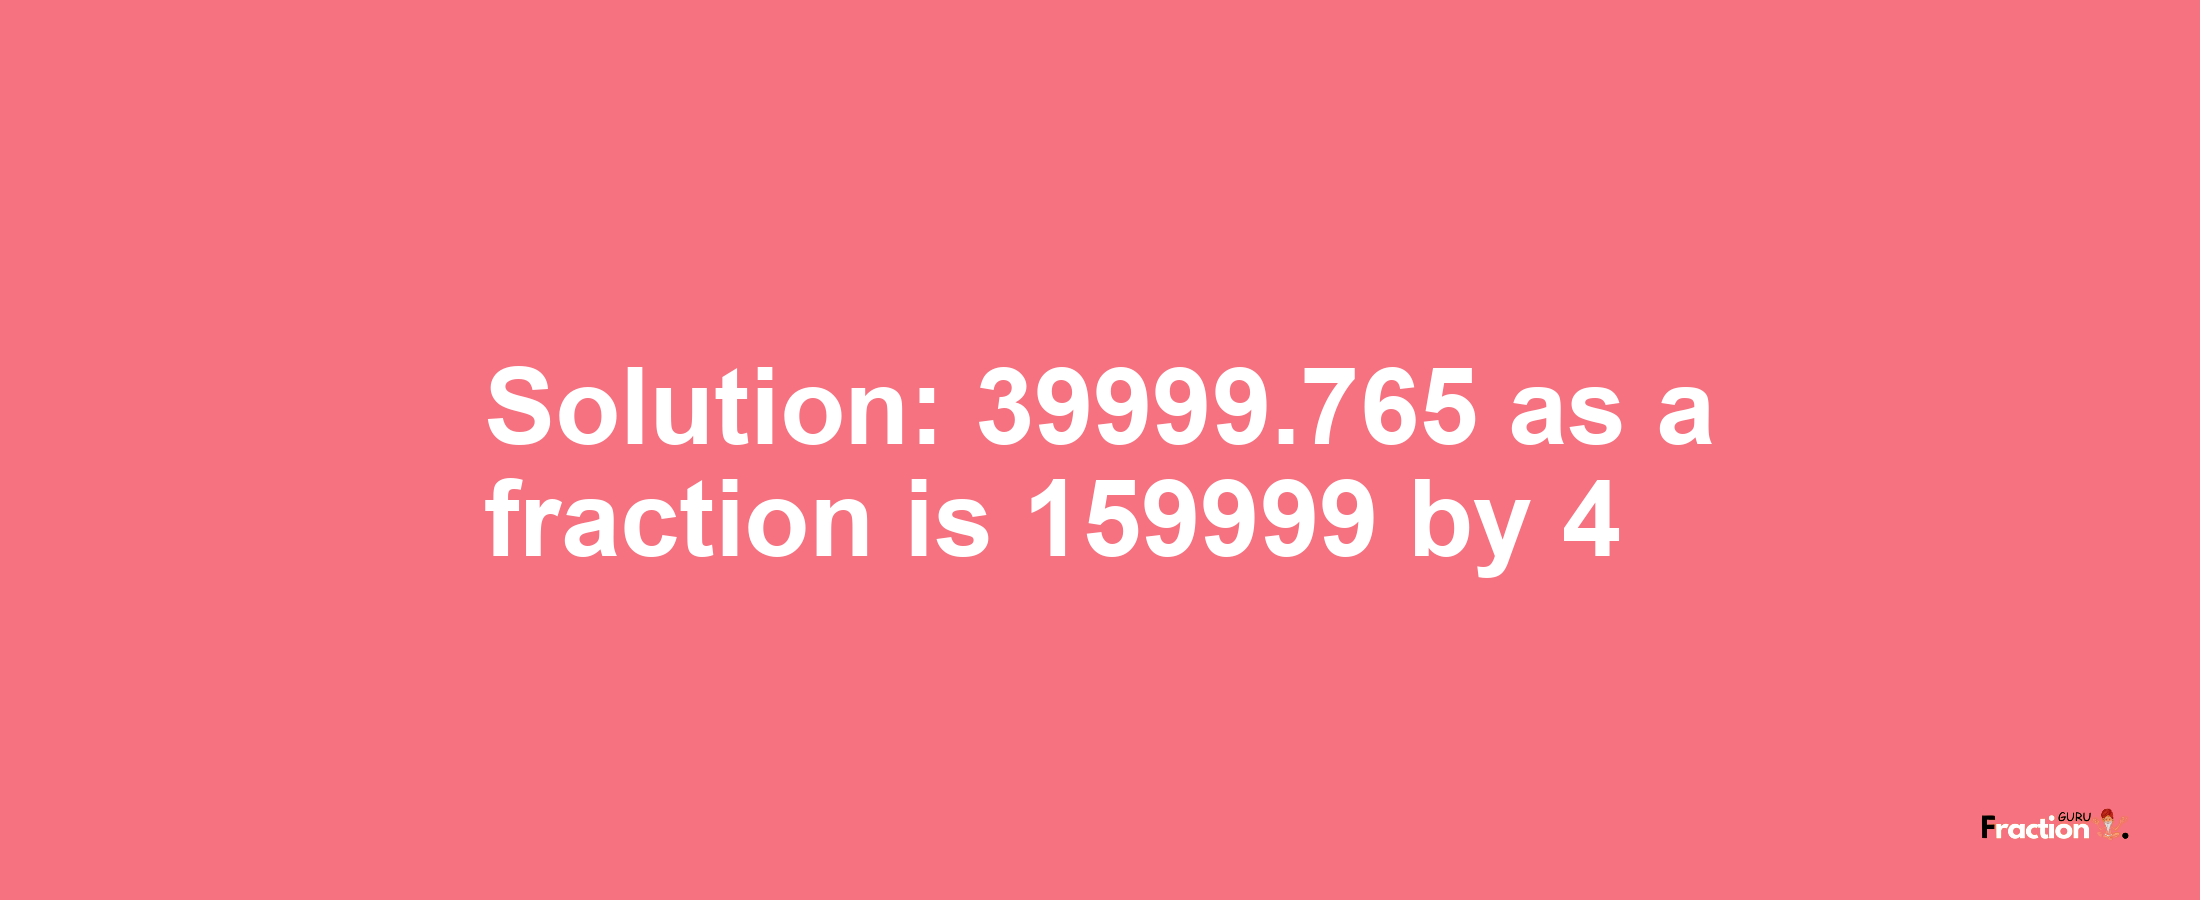 Solution:39999.765 as a fraction is 159999/4